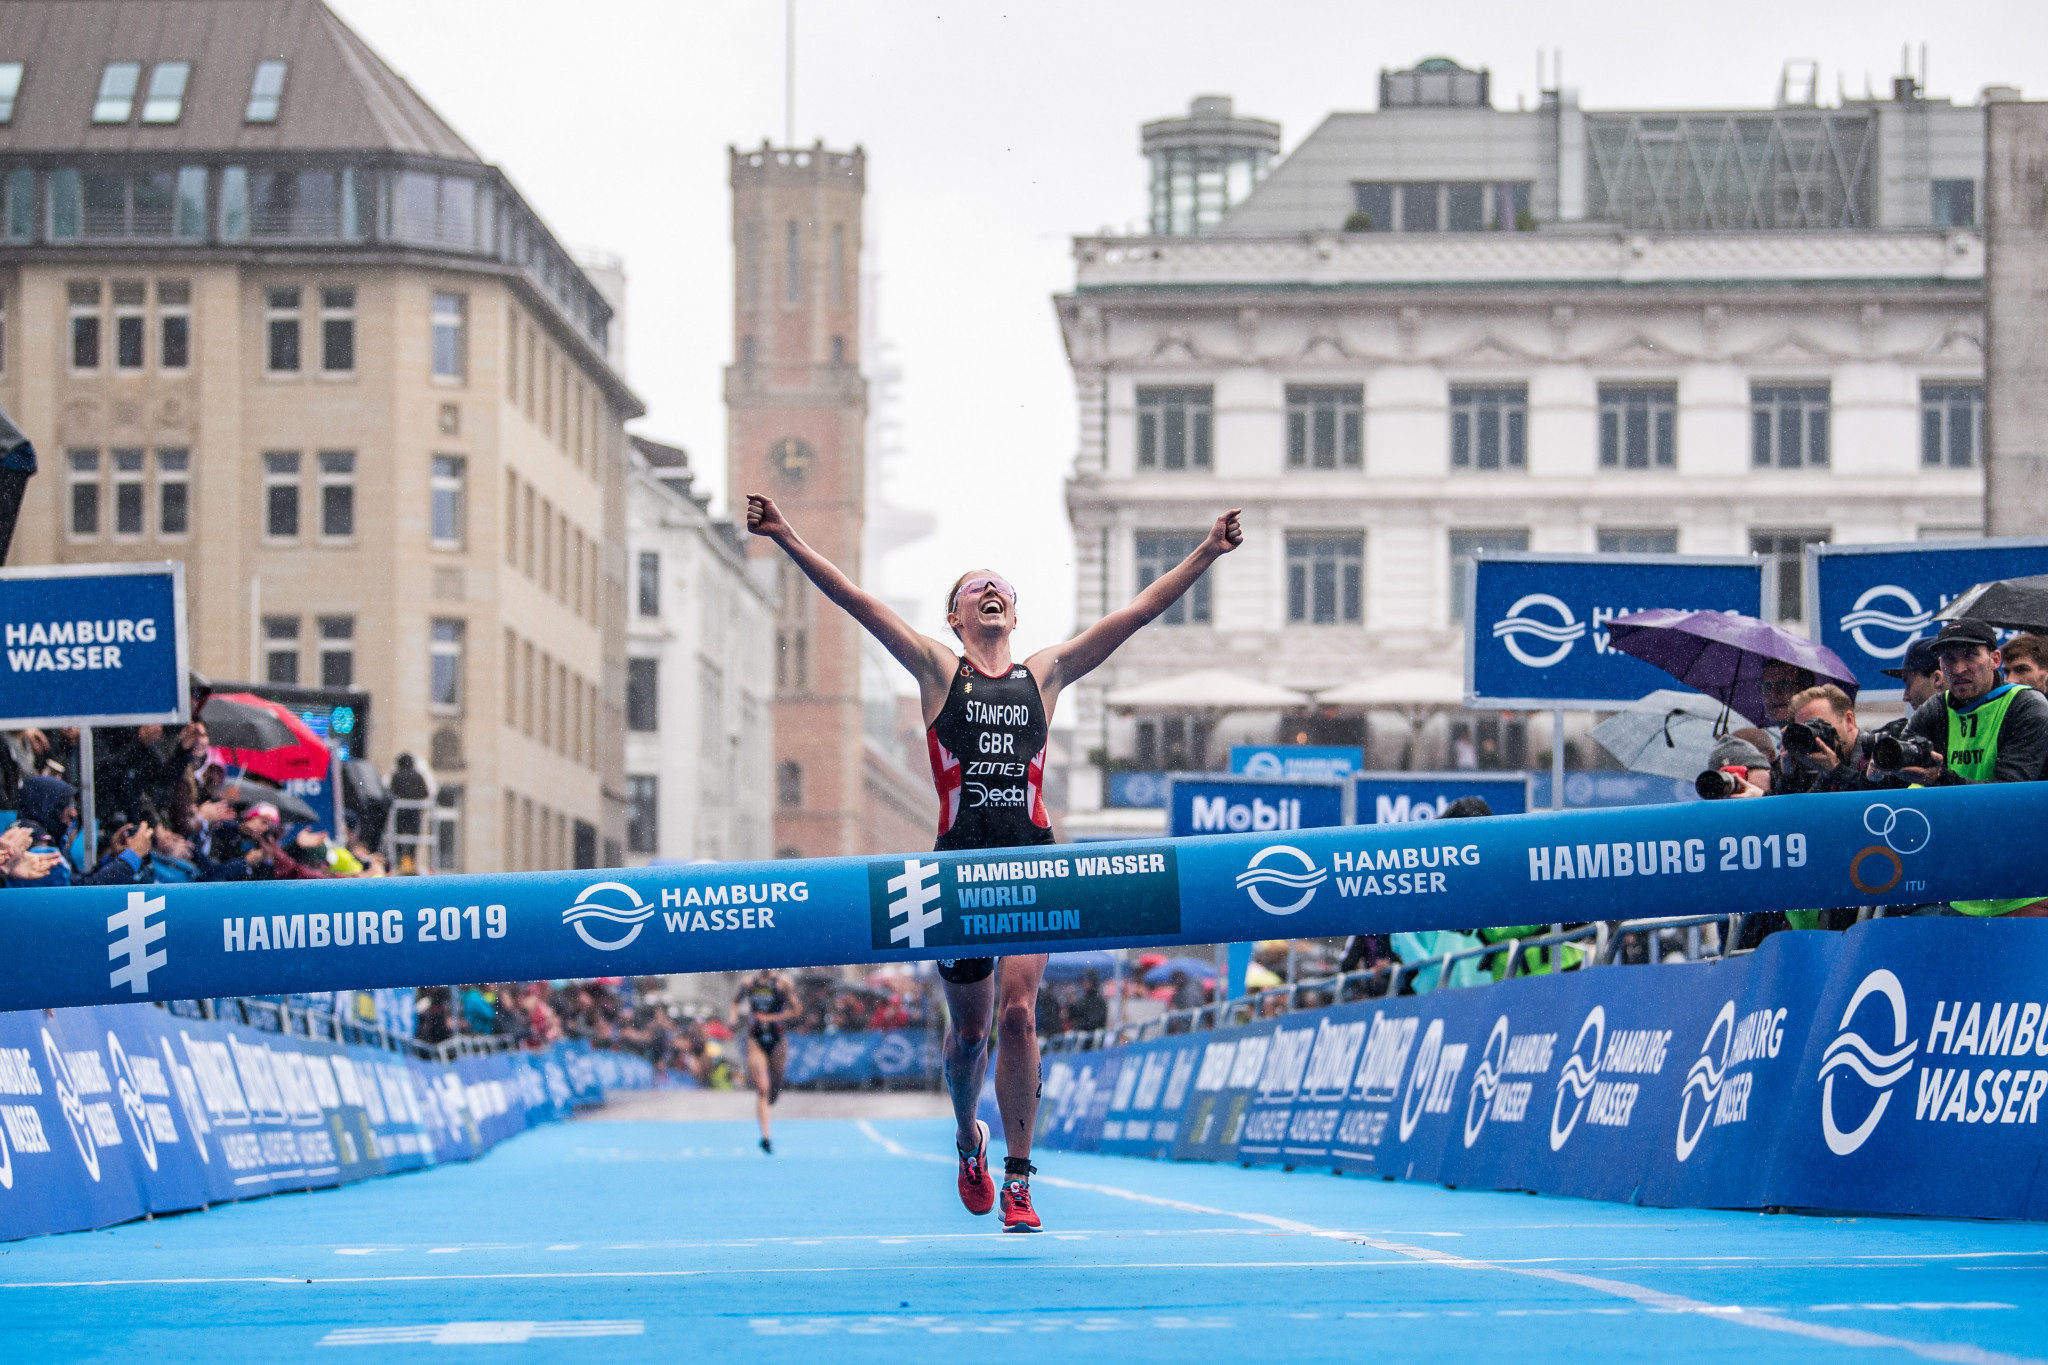 Zaferes retains overall lead as Stanford takes victory at World Triathlon Series